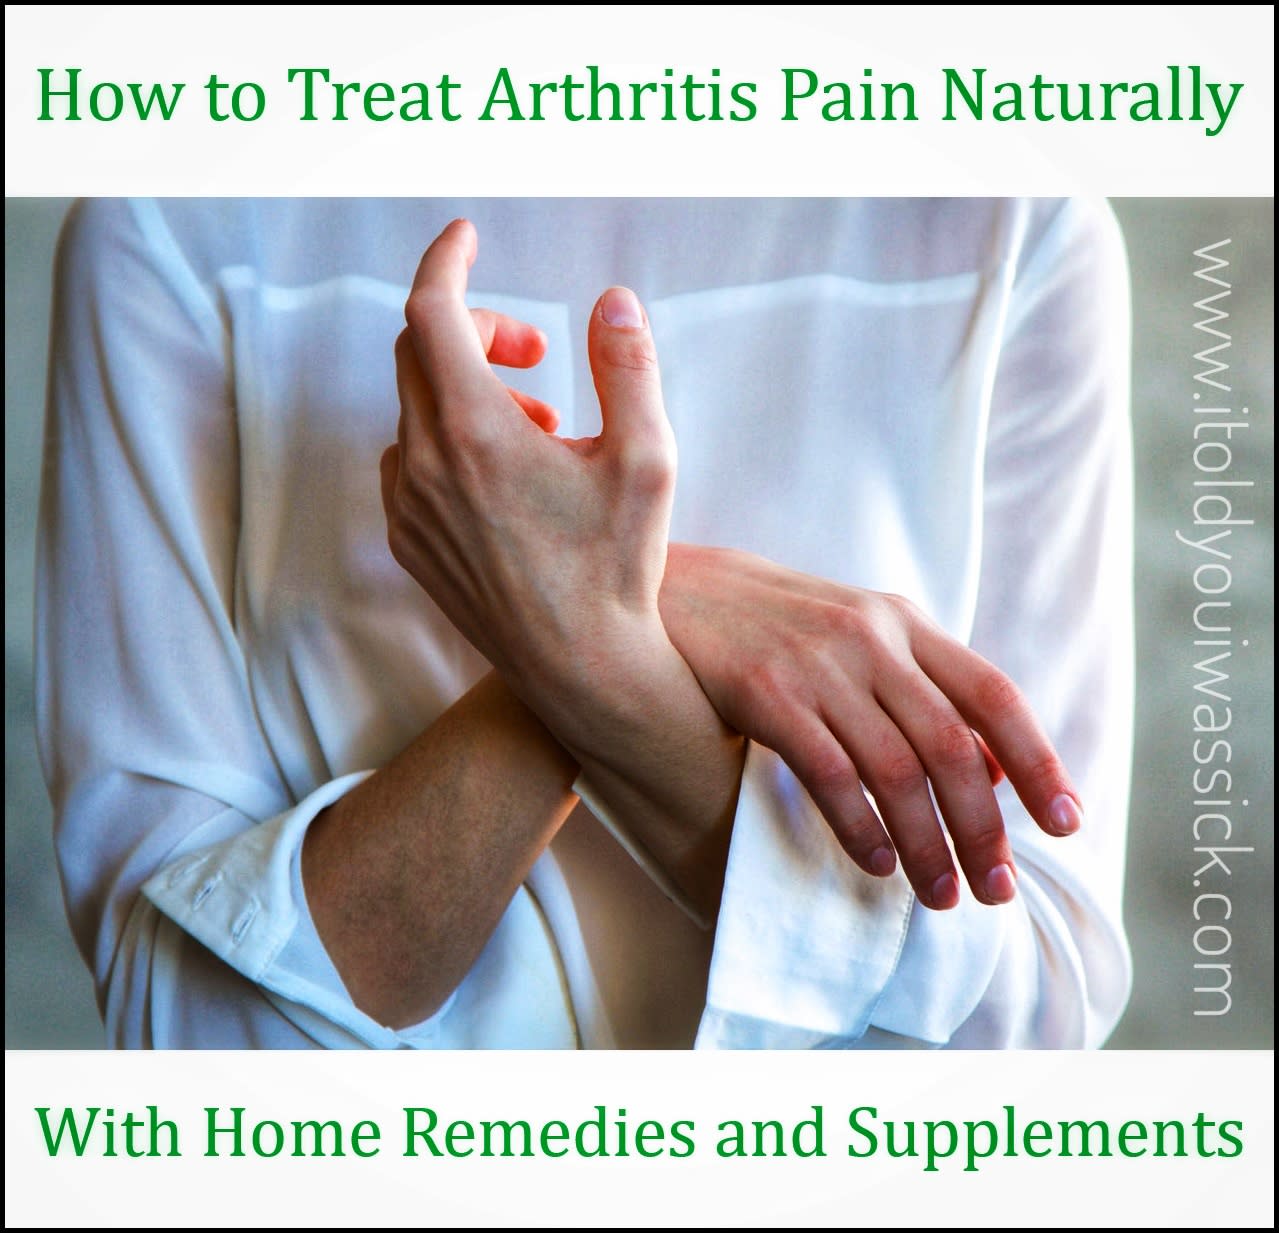 How to Treat Arthritis Pain Naturally With Home Remedies and Supplements - I Told You I Was Sick